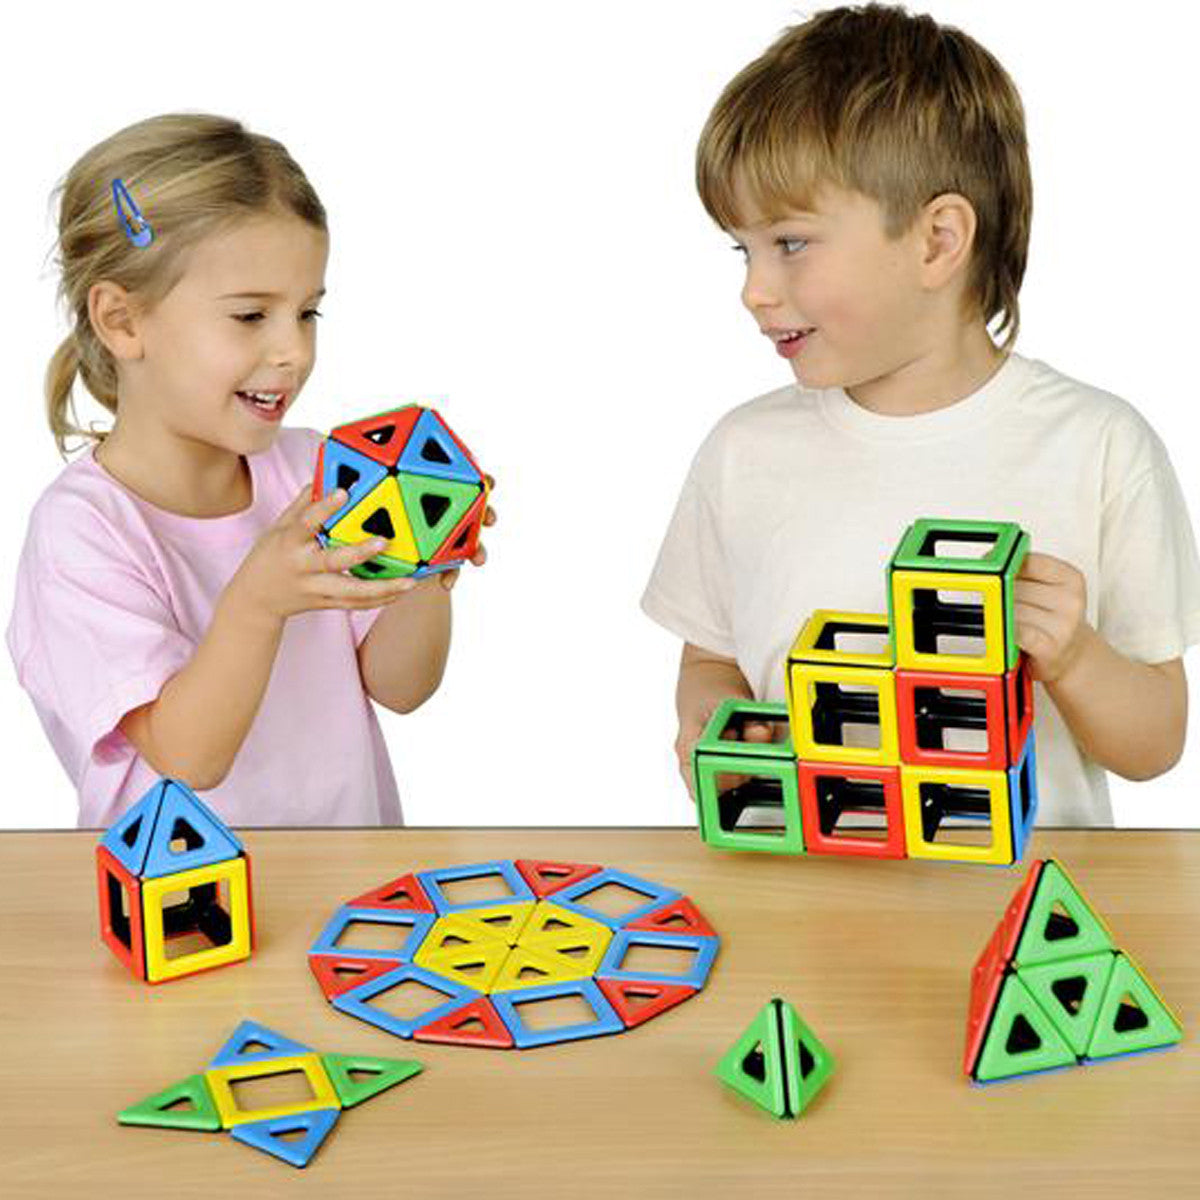 Magnetic polydron class set for early years children | School